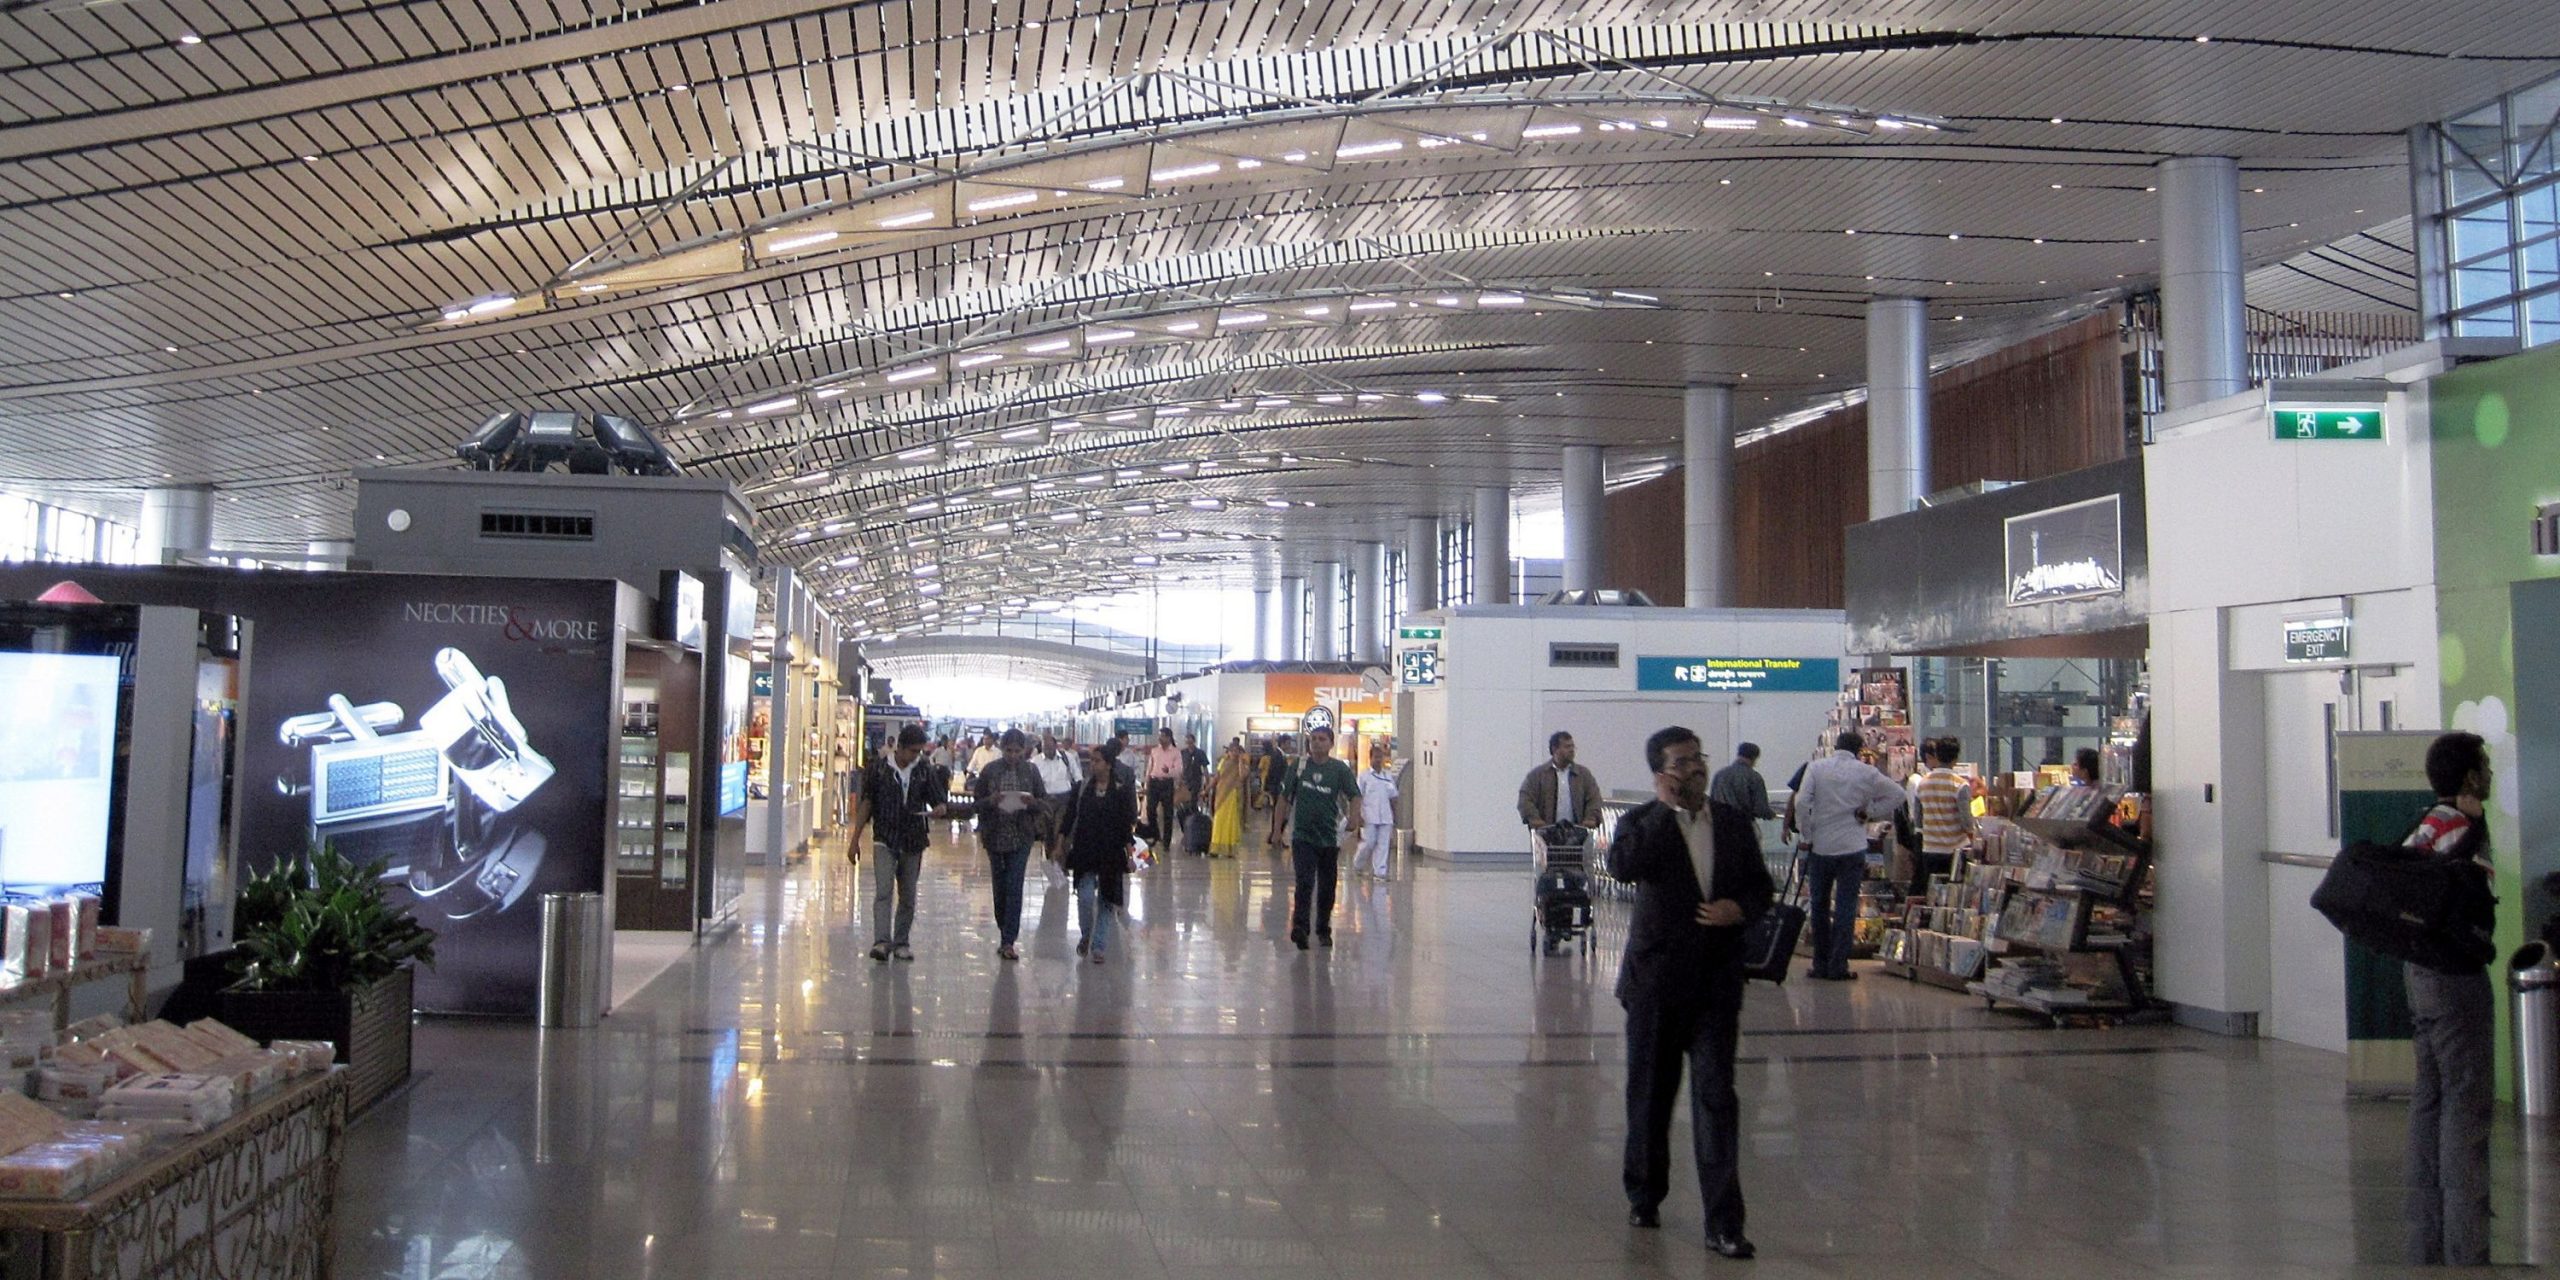 Andhra Pradesh has not had a fully civilian airport since its cleaving from Telangana in 2014, before which it had access to the Hyderabad airport, as seen here. (Supplied)